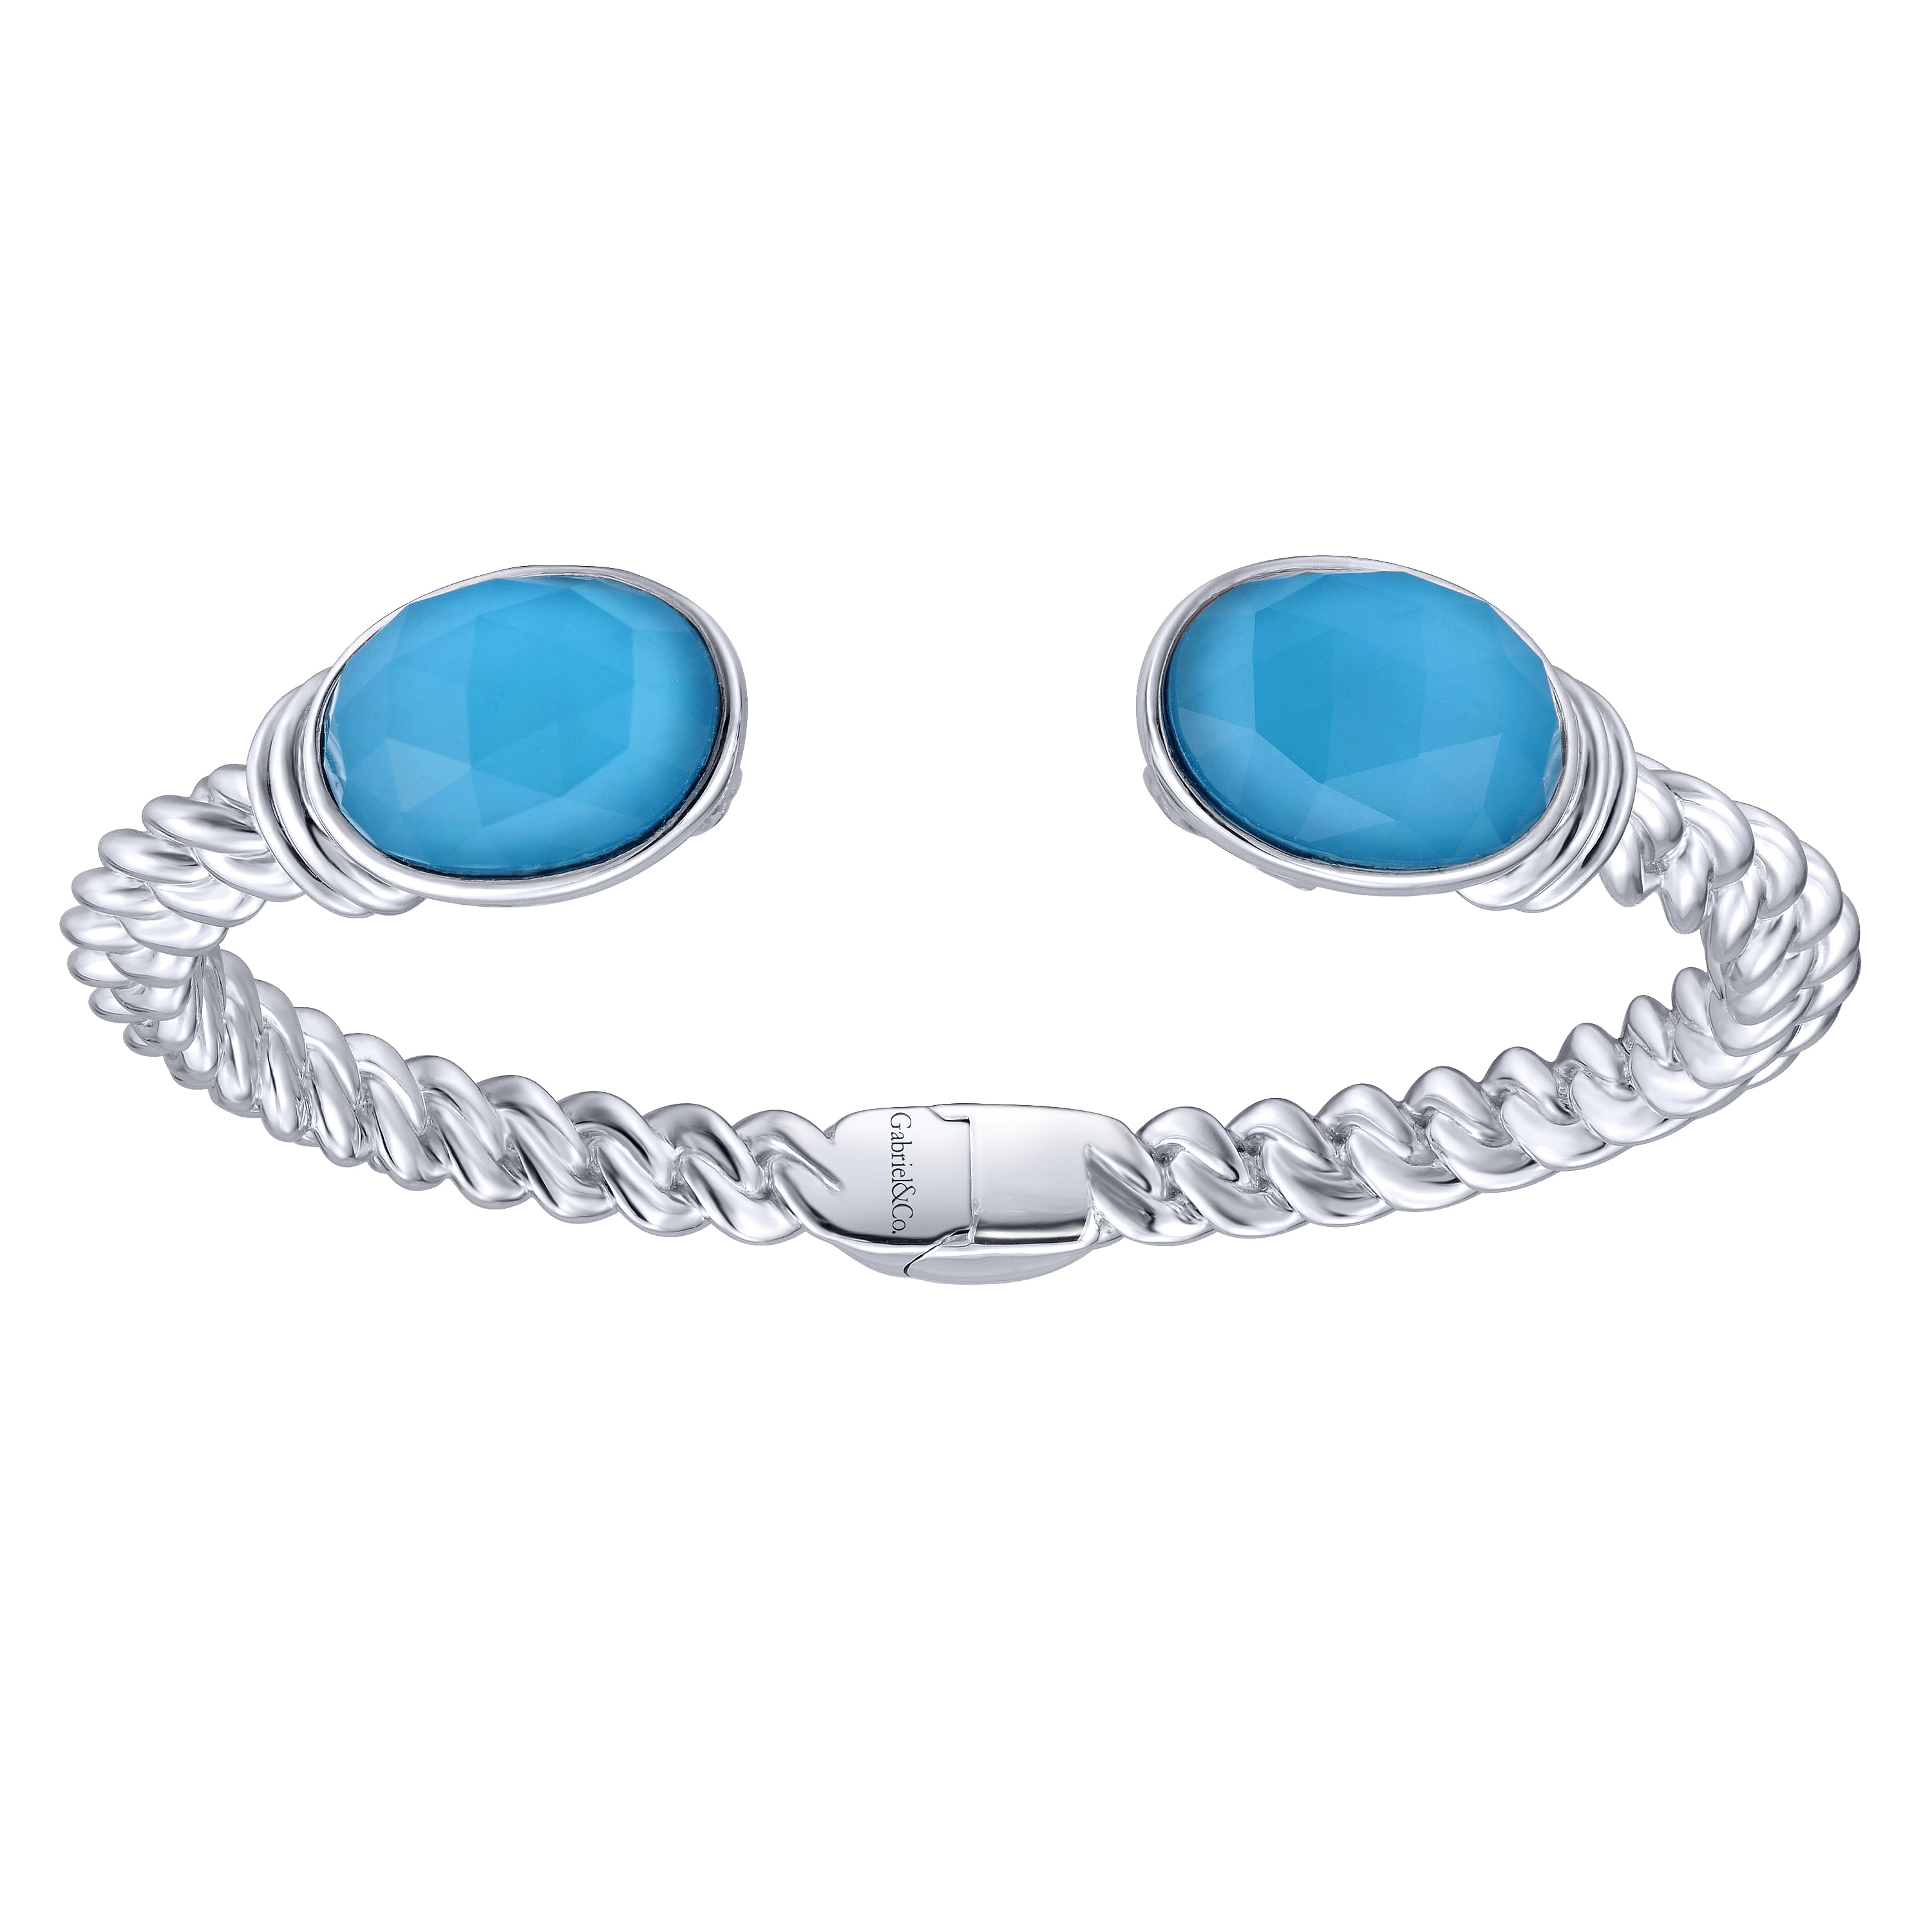 Split 925 Sterling Silver Oval Rock Crystal and Turquoise Bangle